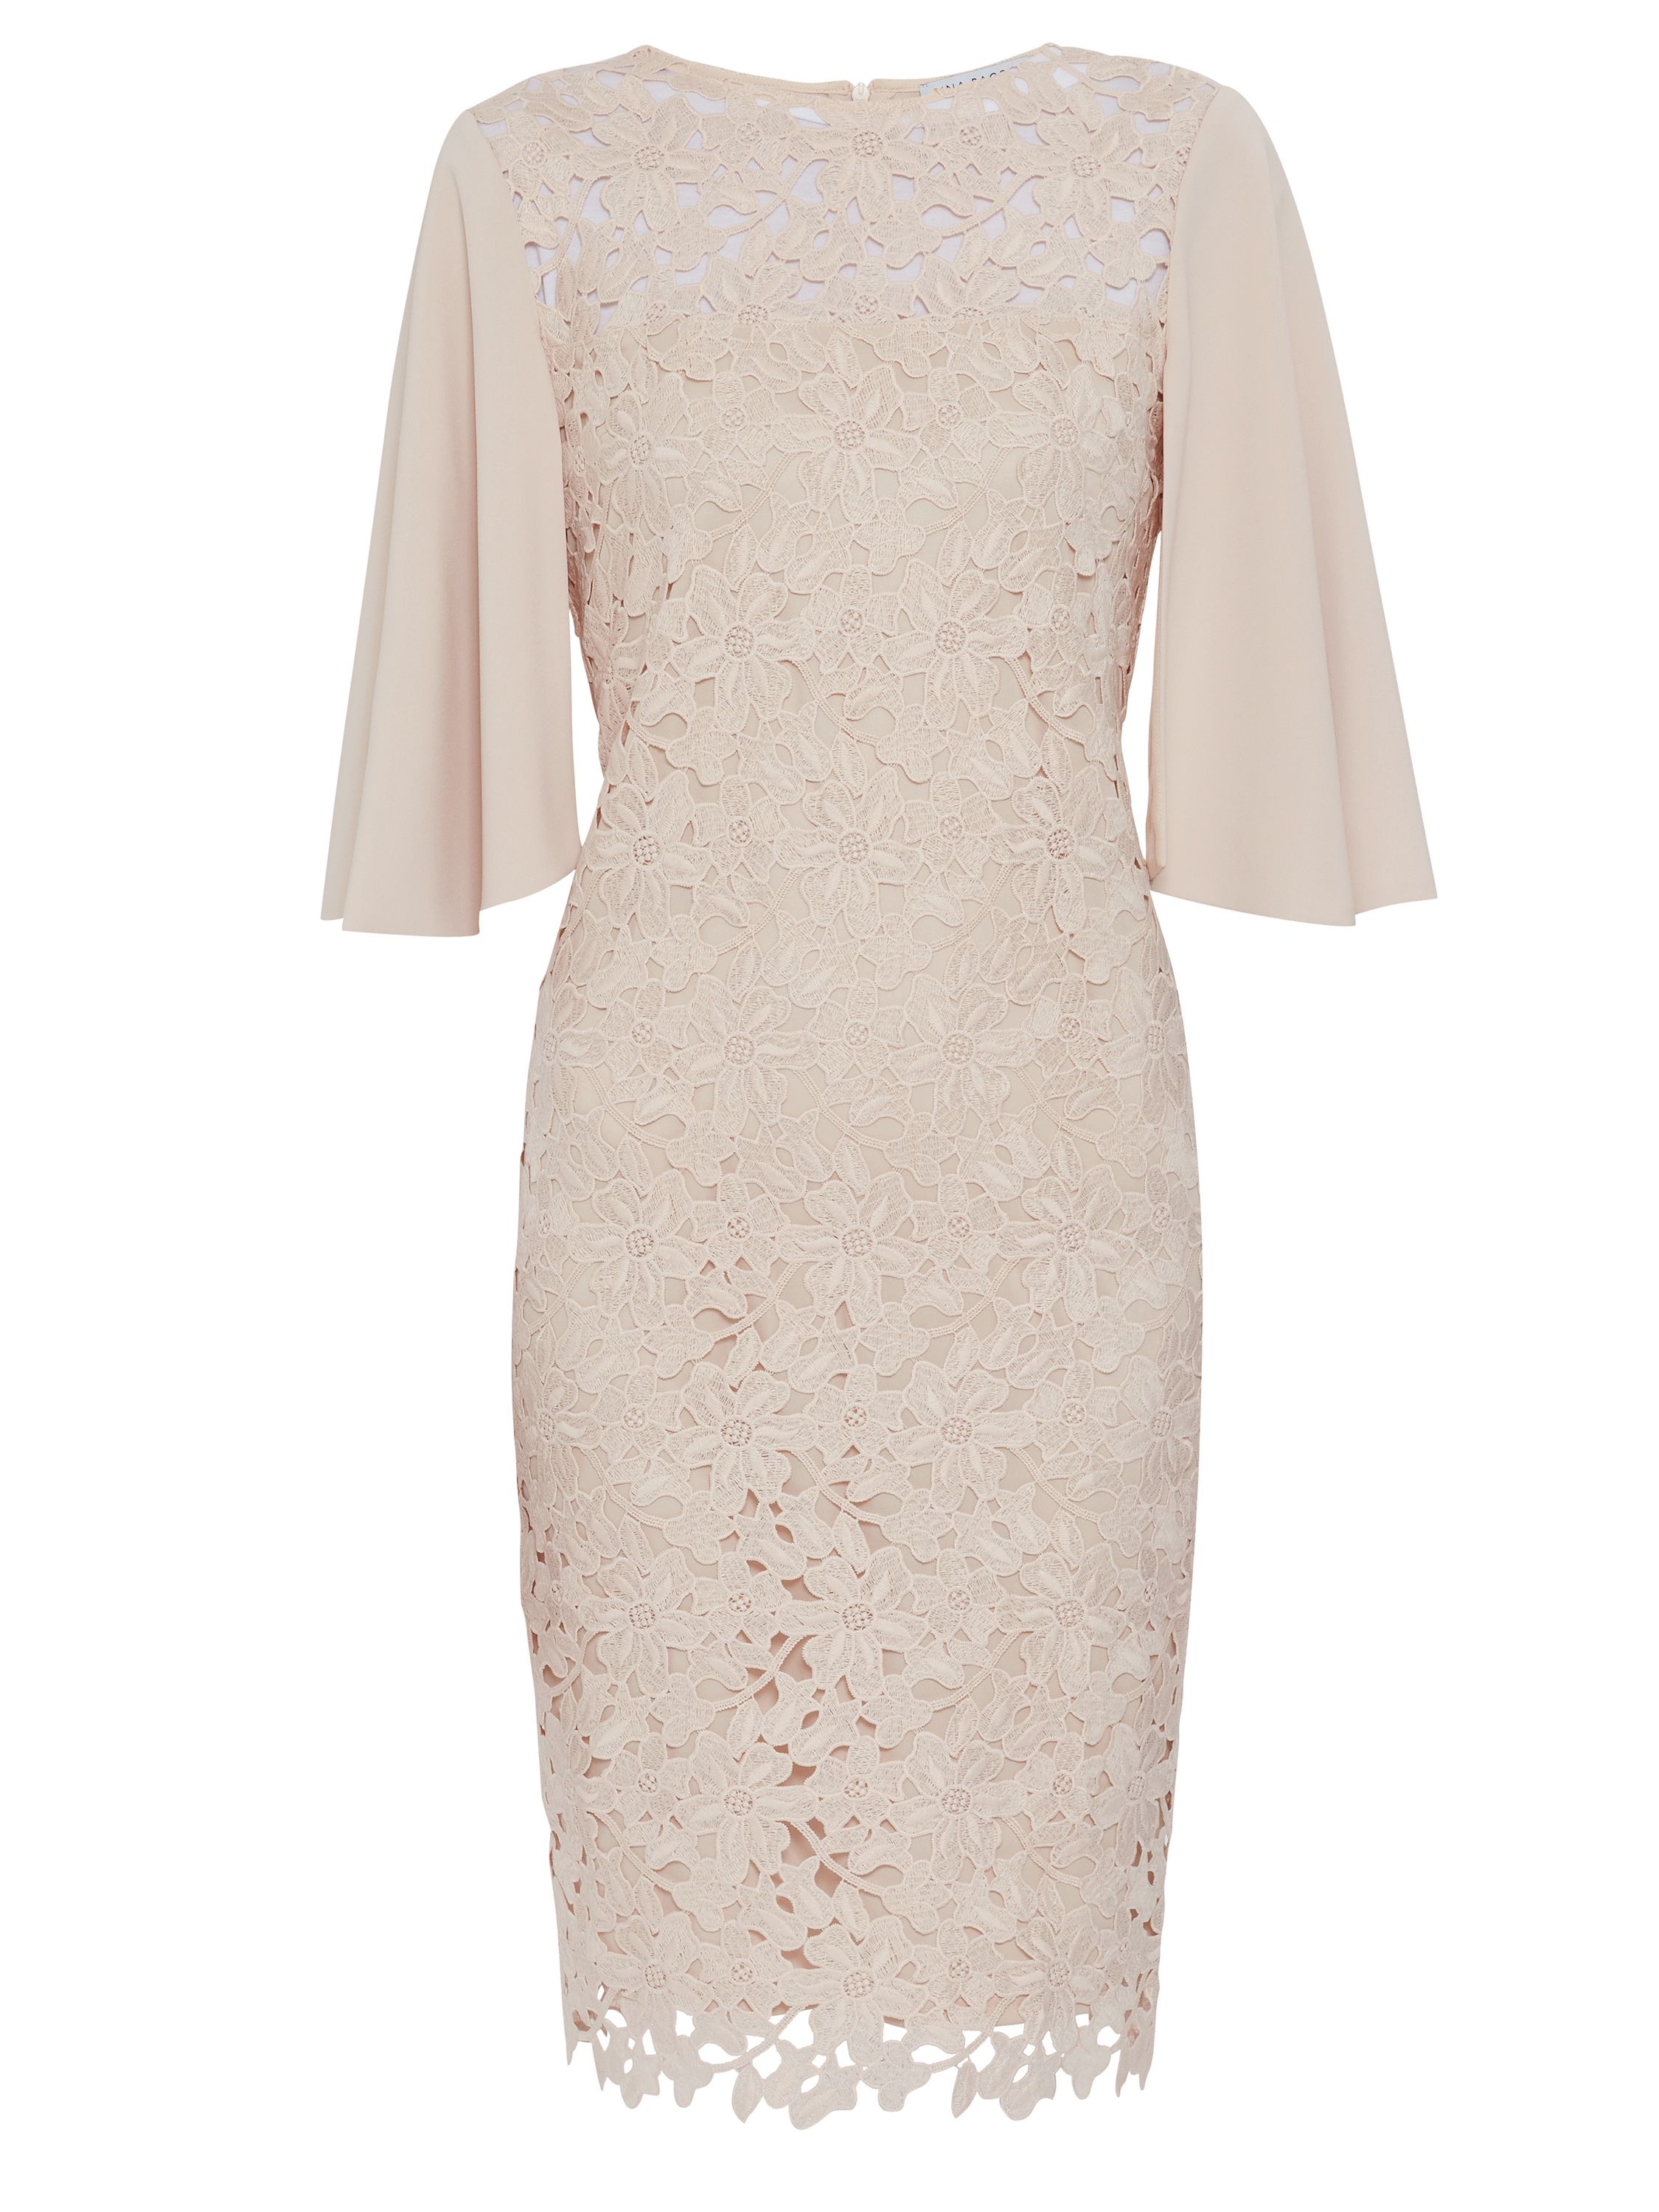 Made of luxurious guipure lace in a beautiful primrose design, this Gina Bacconi frock is simply perfect for the summer season. It is cut to flatter in a shift dress style, with an unlined sheer yoke and a round neckline.Featuring crepe cape sleeves for added class. The dress has a zip opening at the back as well as a hook and eye fastening which creates a keyhole shape feature.